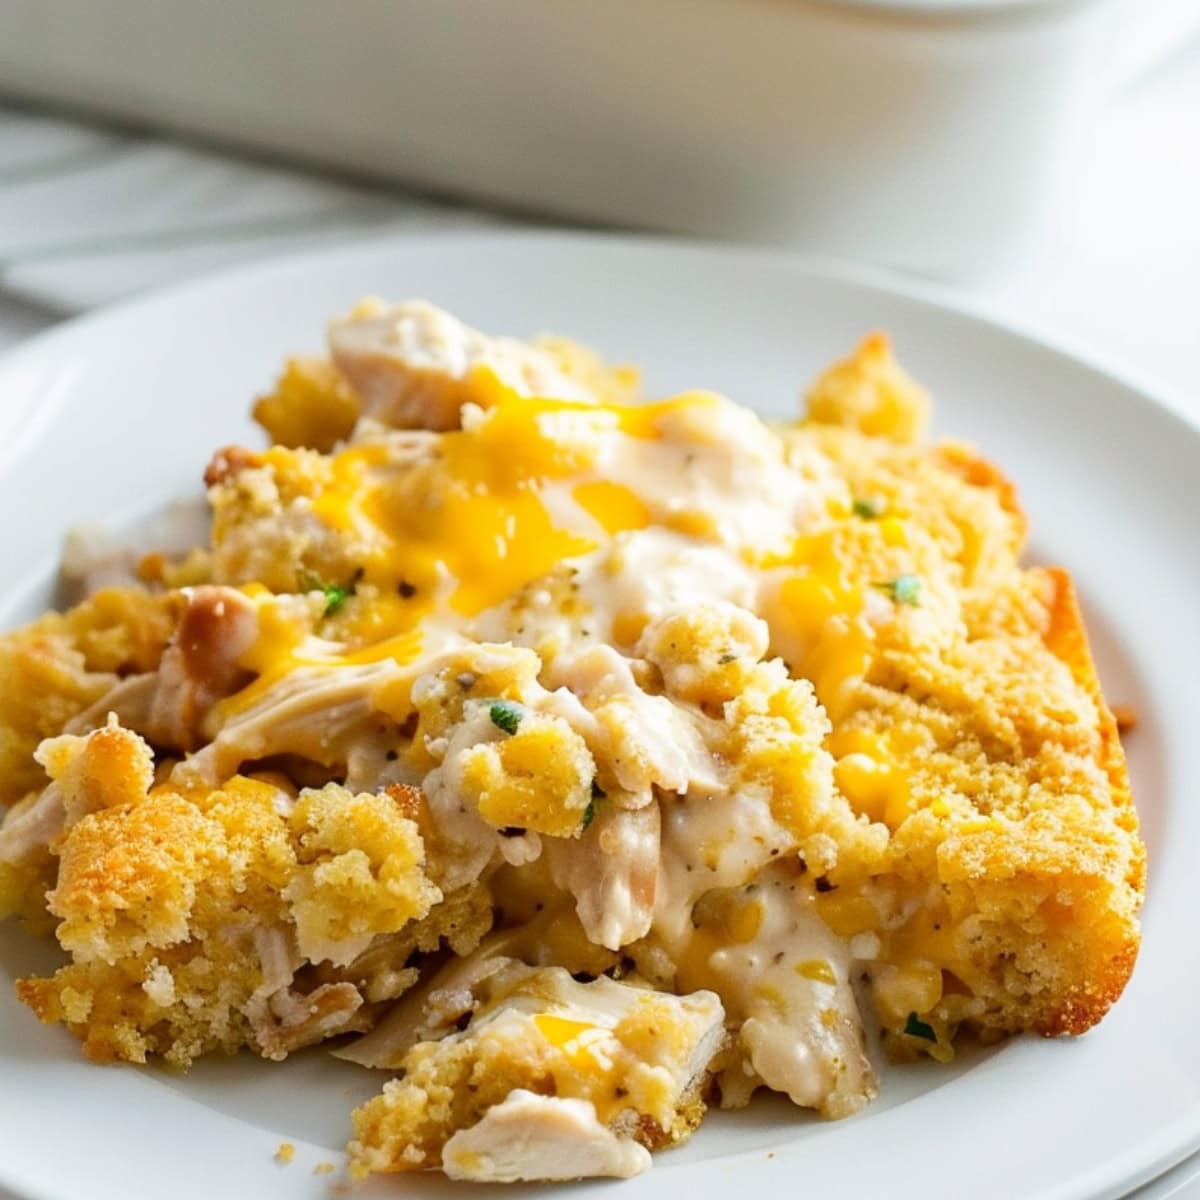 Cheesy and creamy serving of chicken cornbread casserole served on a white plate.